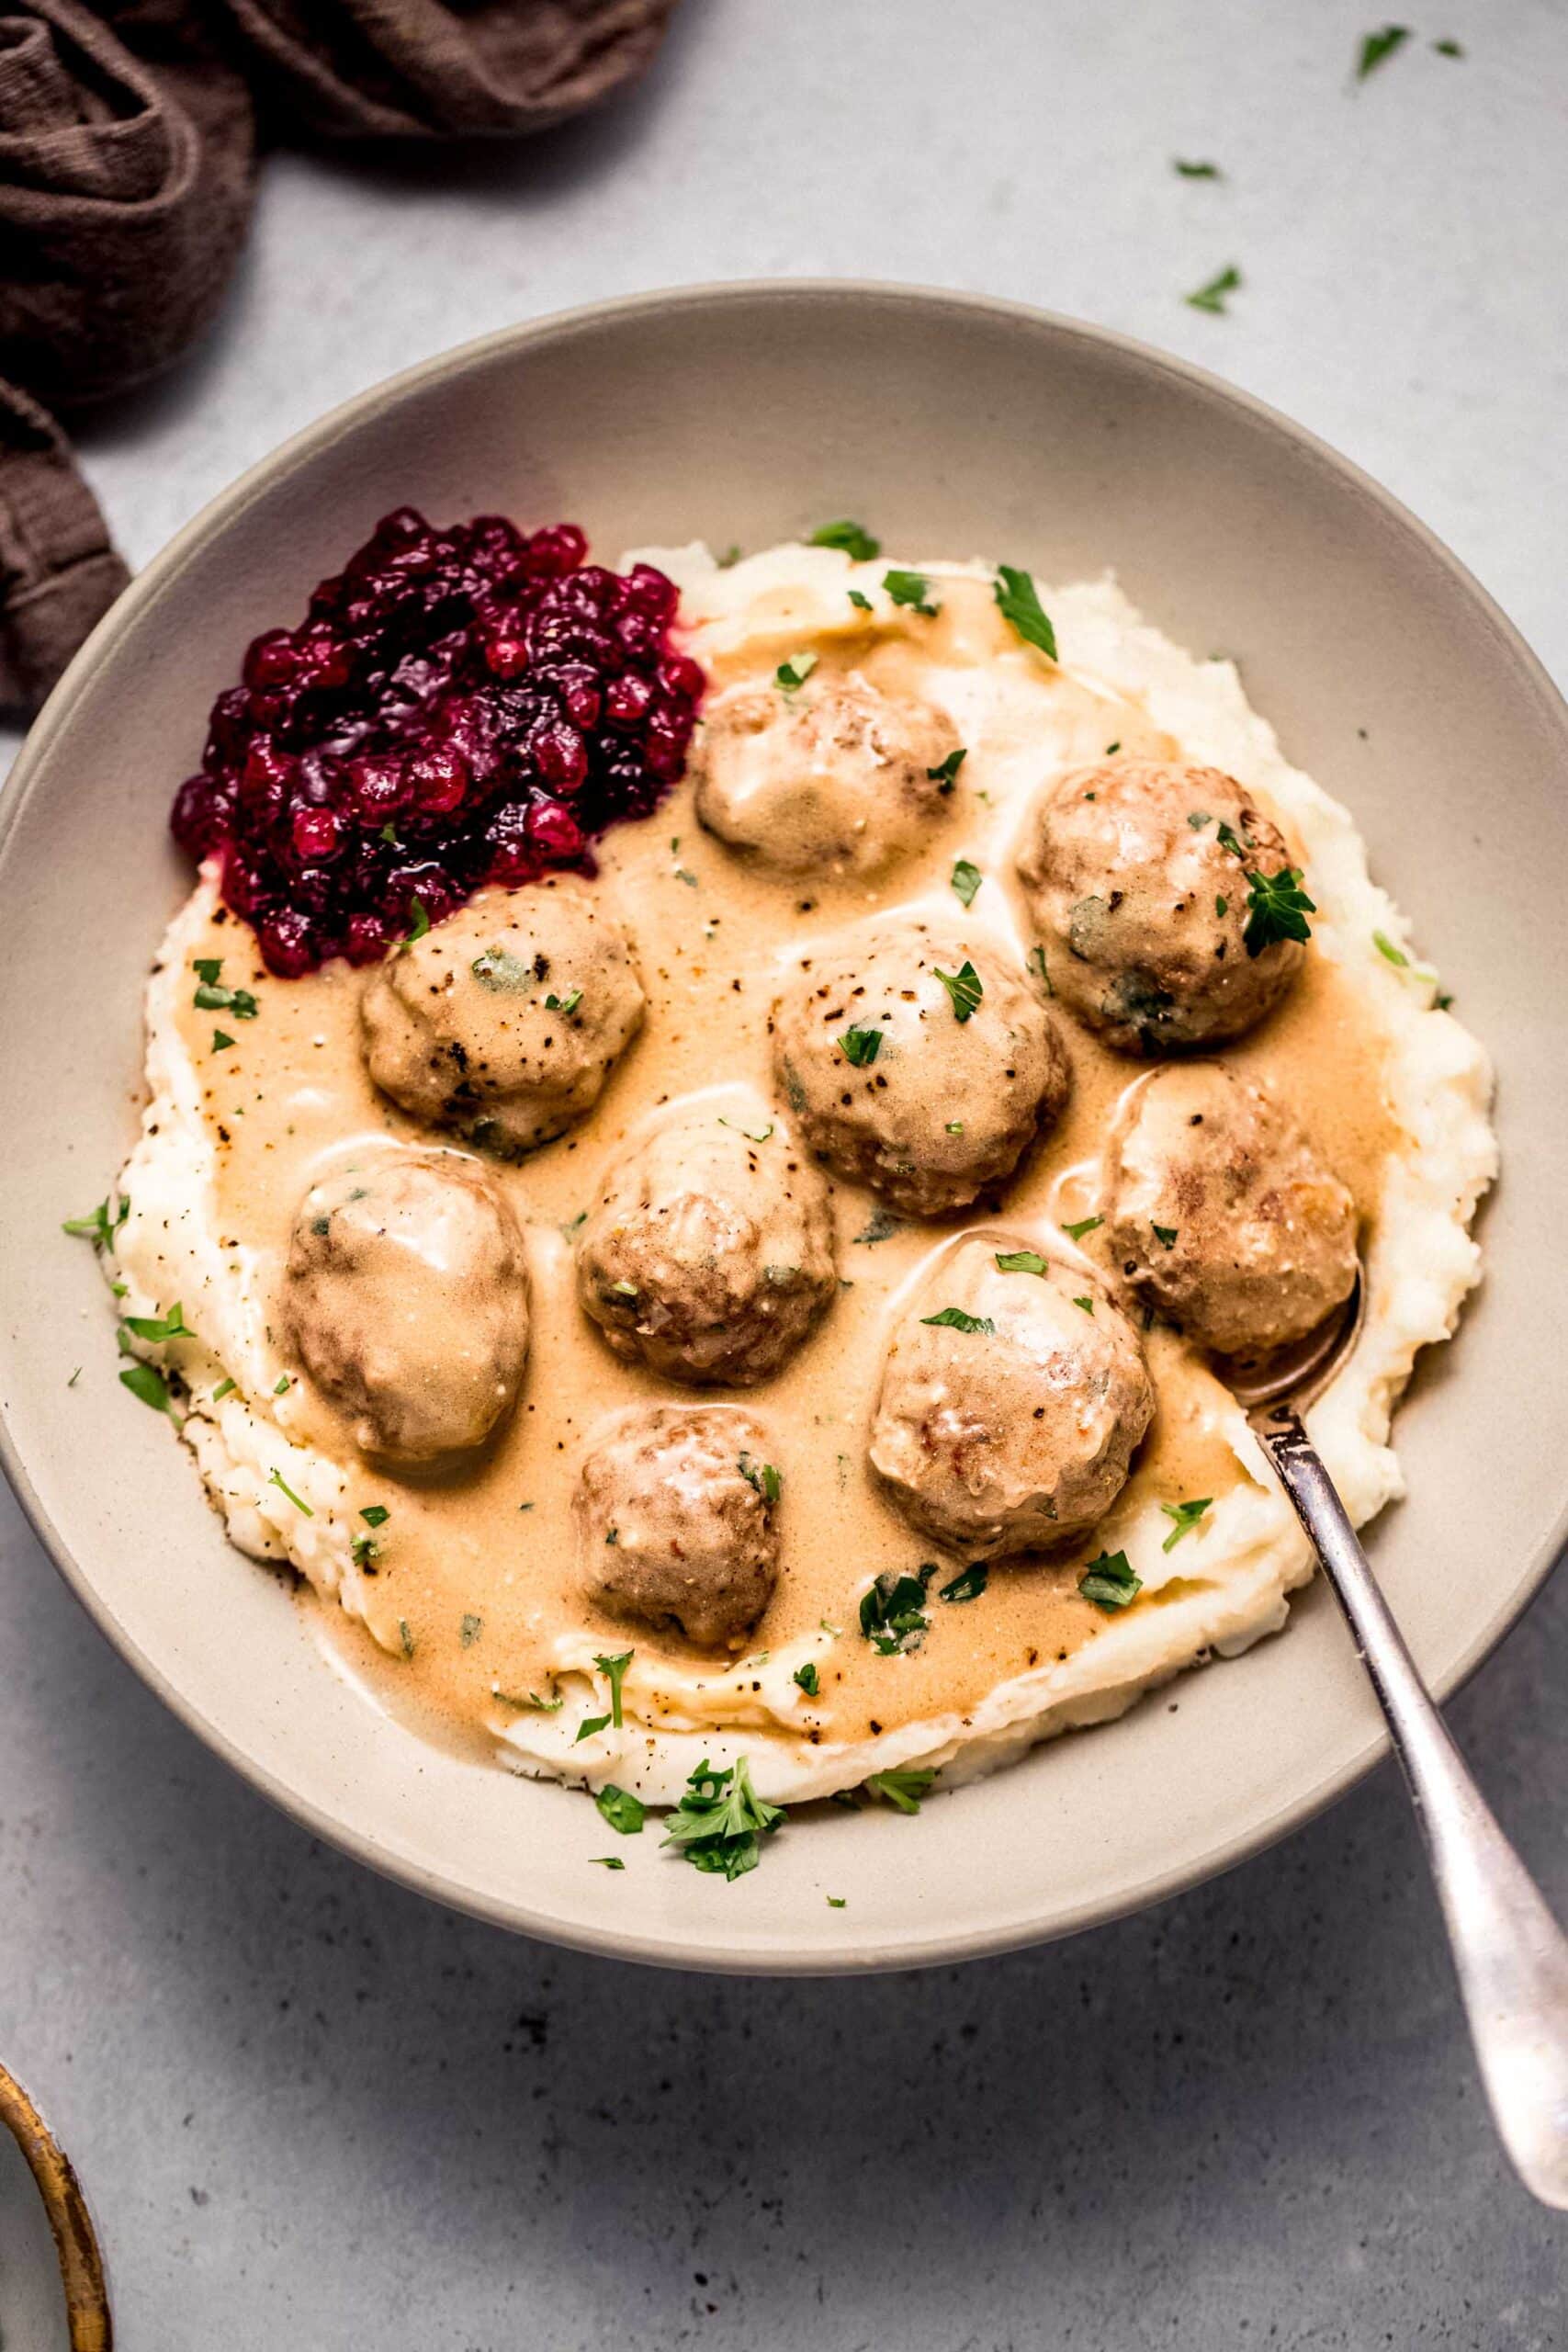 Turkey swedish meatballs arranged in bowl with mashed potatoes and dollop of lingonberry jam.